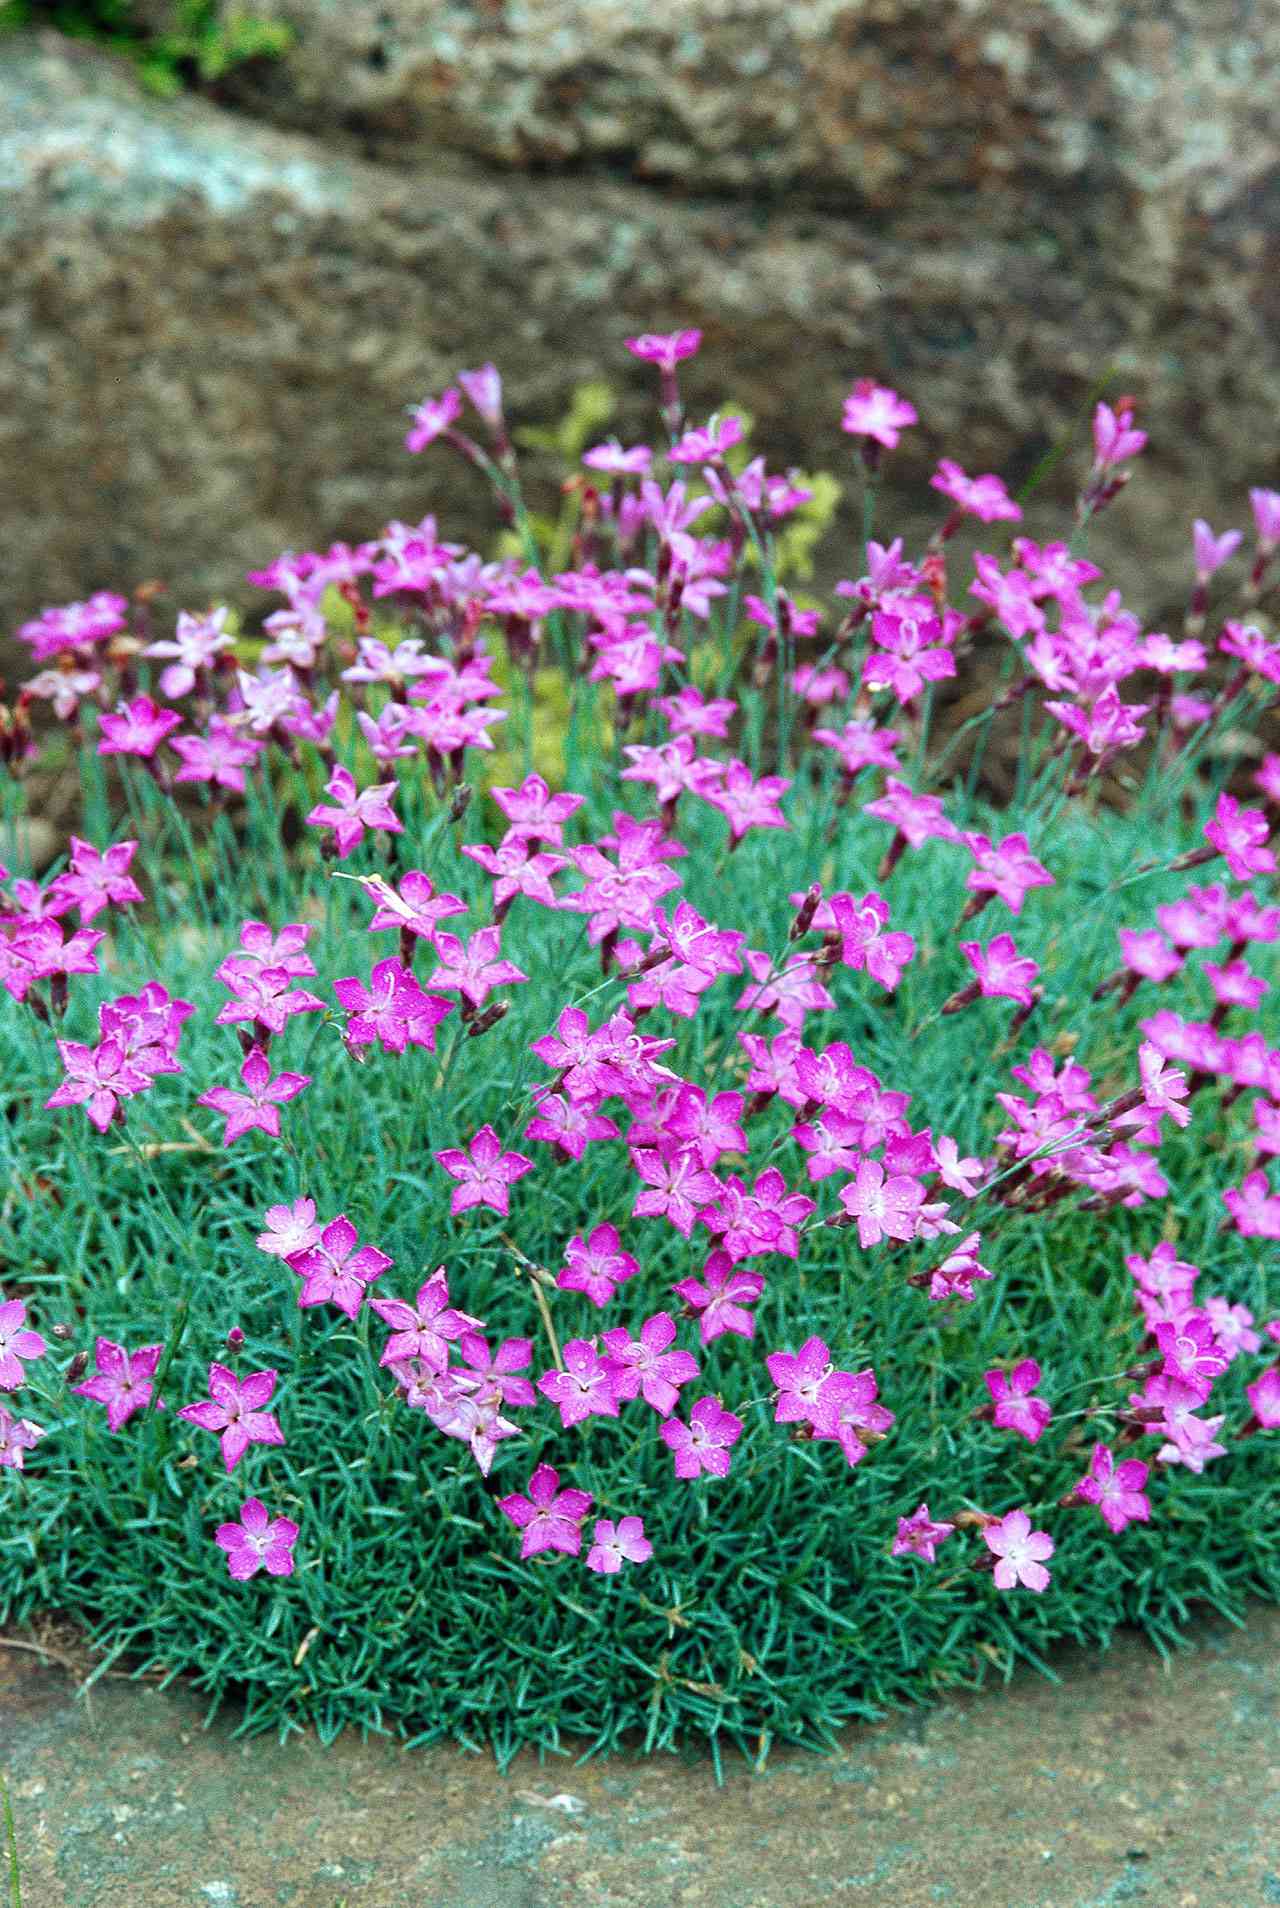 Drought Tolerant Groundcovers Better, Best Ground Cover For No Weeds